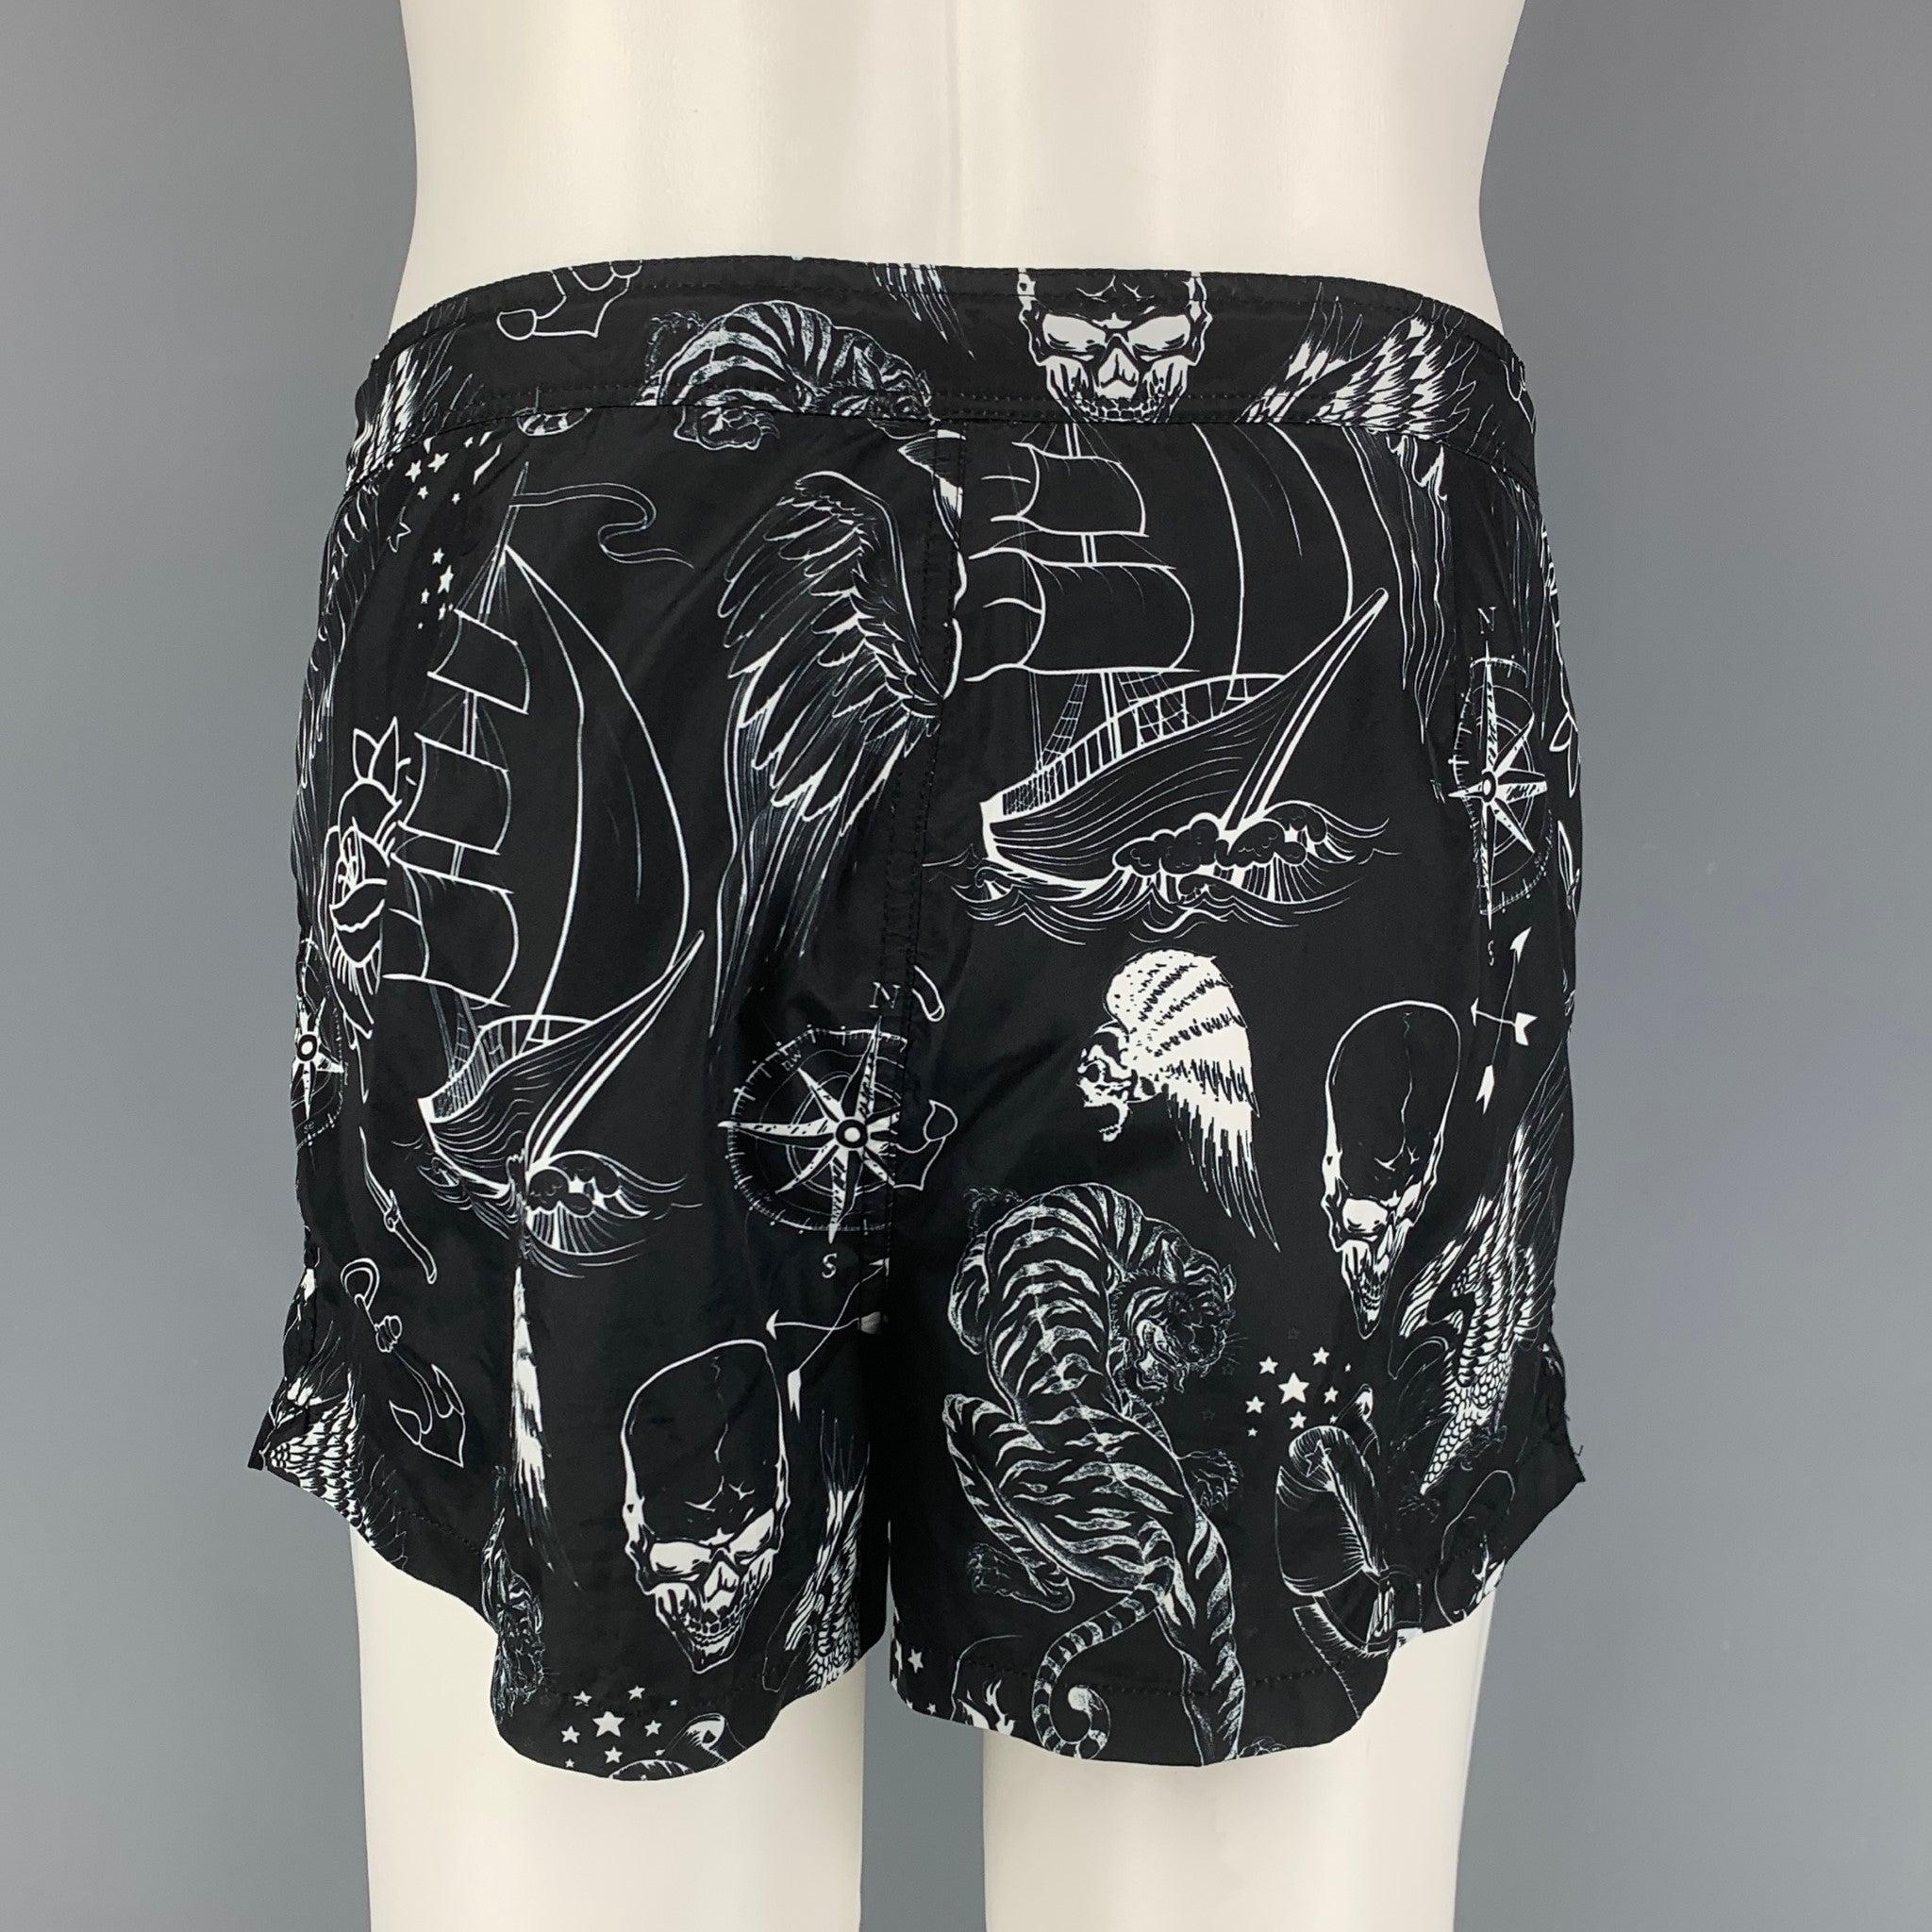 PHILIPP PLEIN shorts comes in a black & white print polyamide featuring a drawstring detail and a zip fly closure. Made in Italy.Very Good
Pre-Owned Condition. 

Marked:   M  

Measurements: 
  Waist: 32 inches  Rise: 11 inches  Inseam: 2.5 inches 
